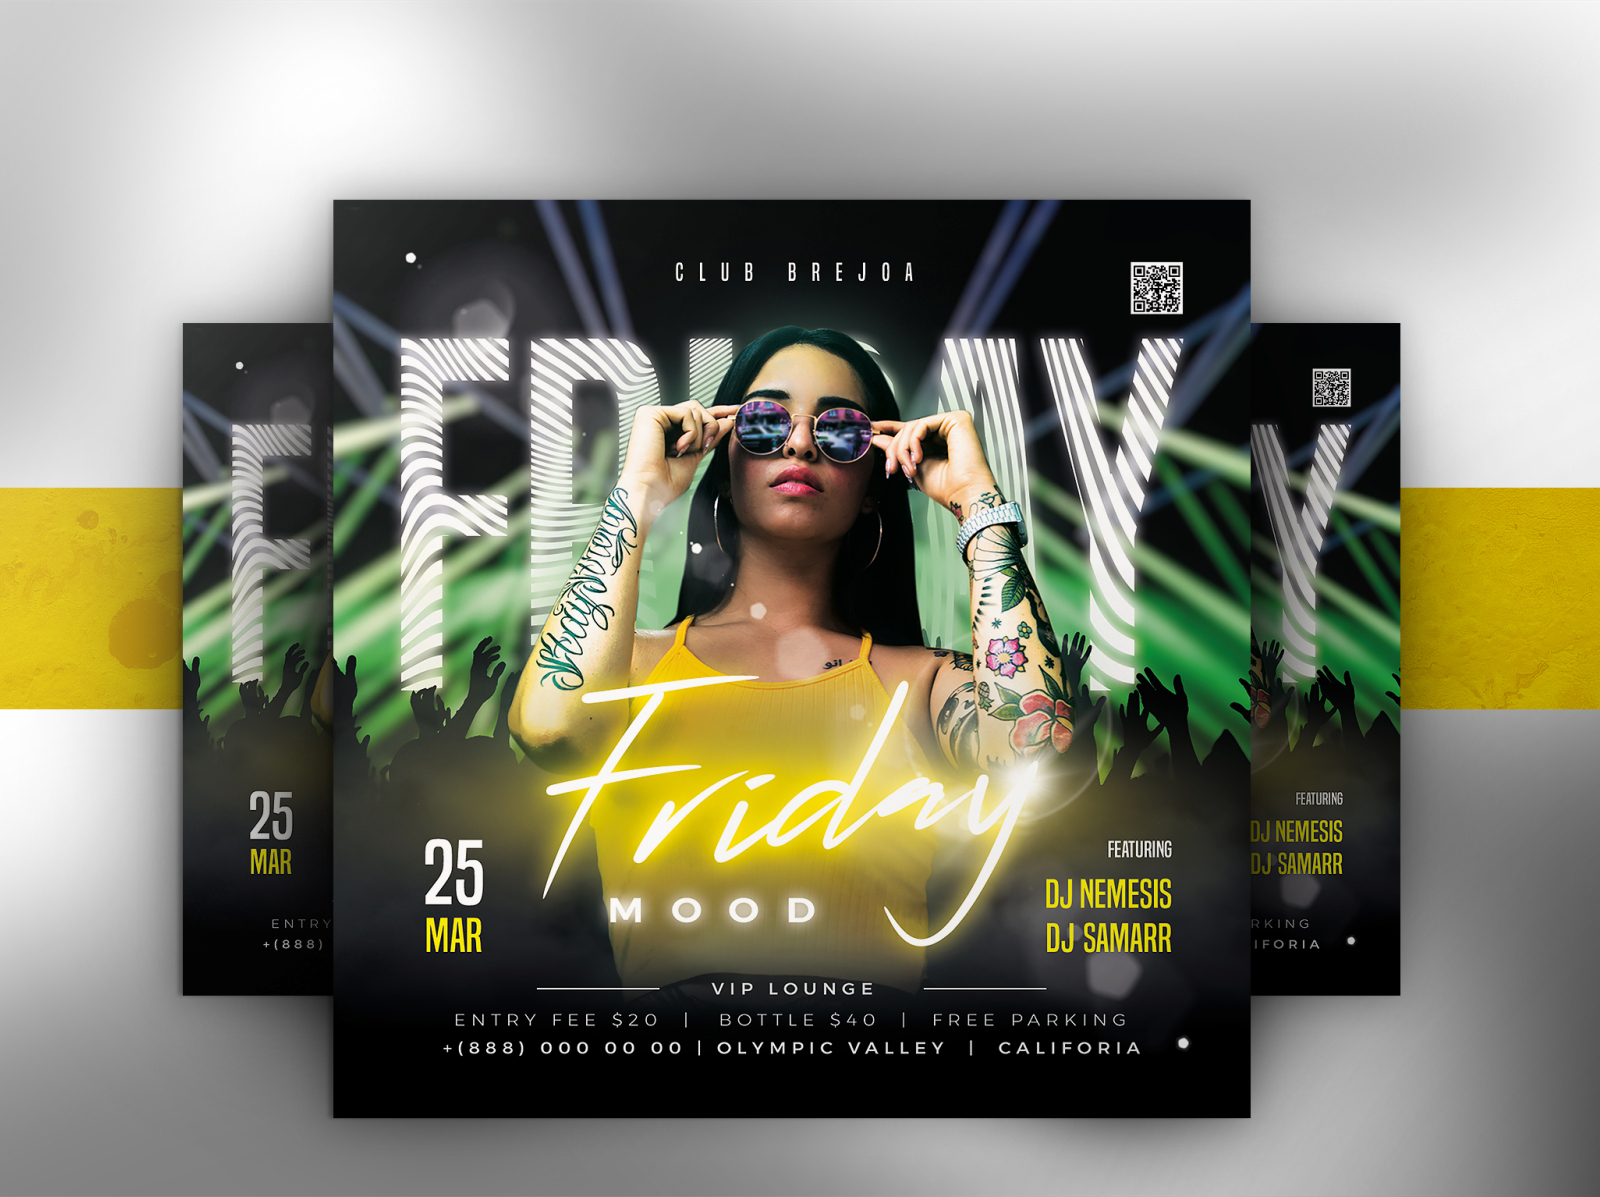 DJ Party Flyer Template by Brejoa on Dribbble